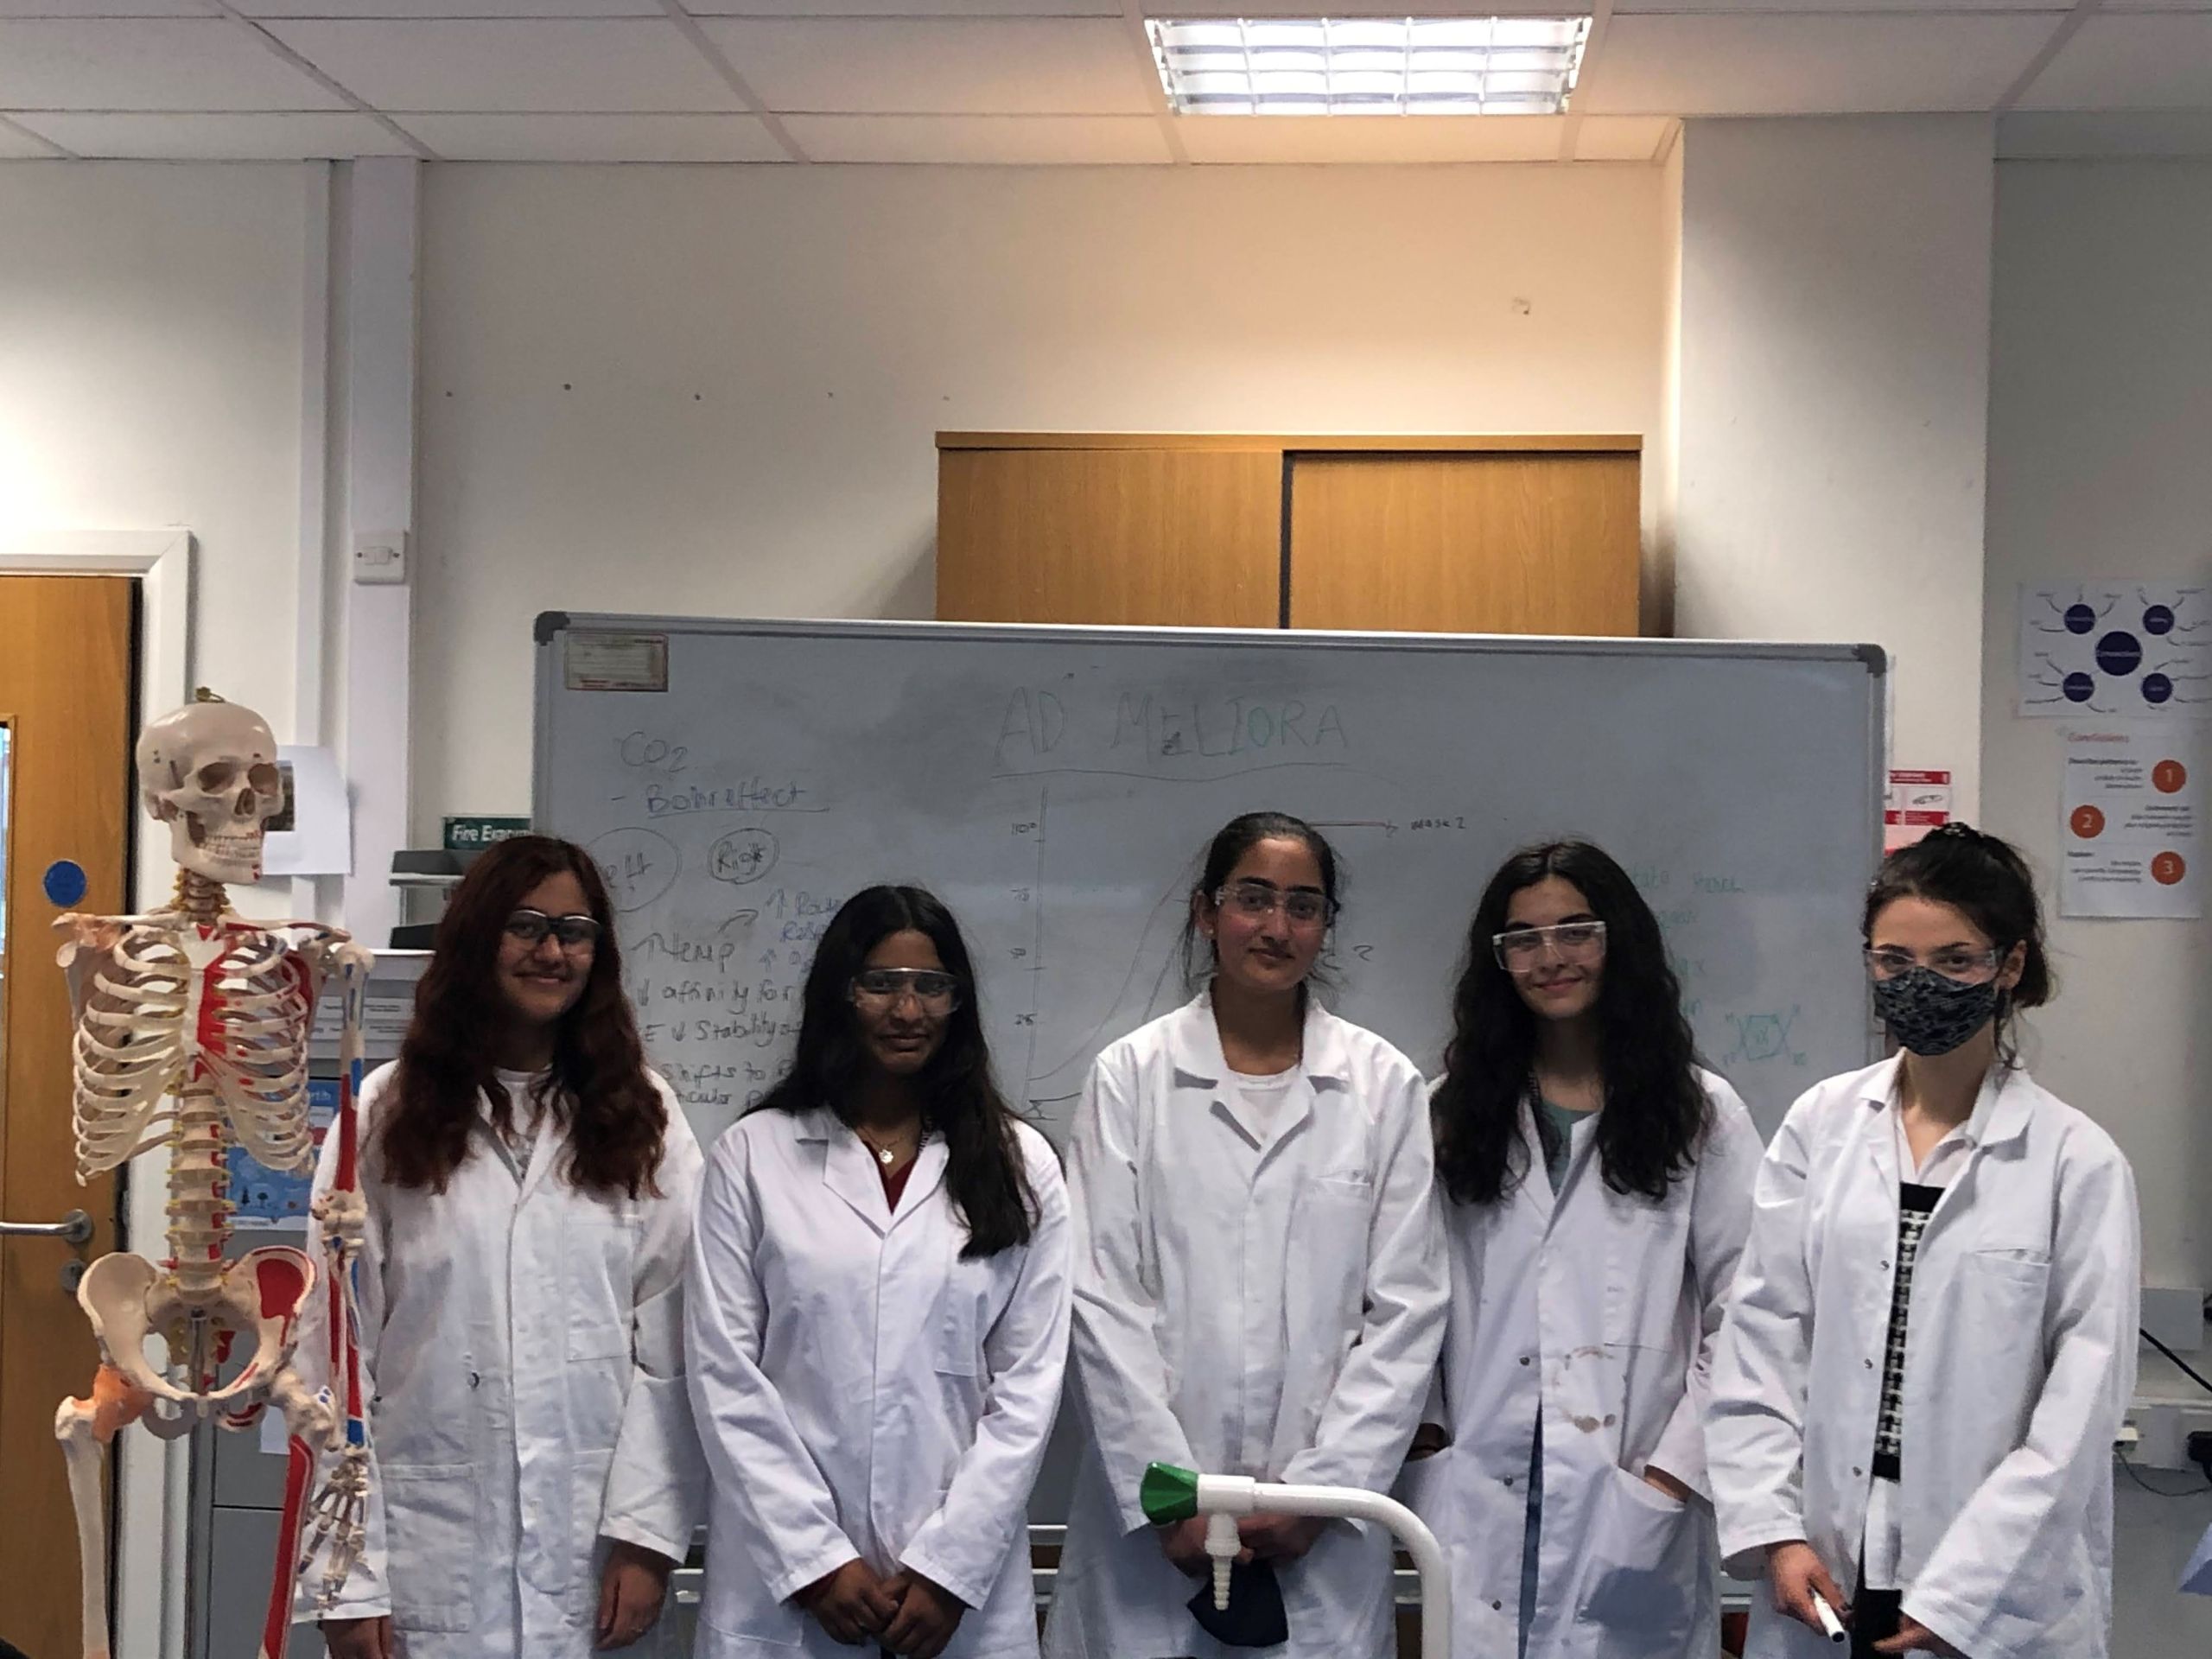 Five female students in lab coats stand in front of a whiteboard in their science classroom